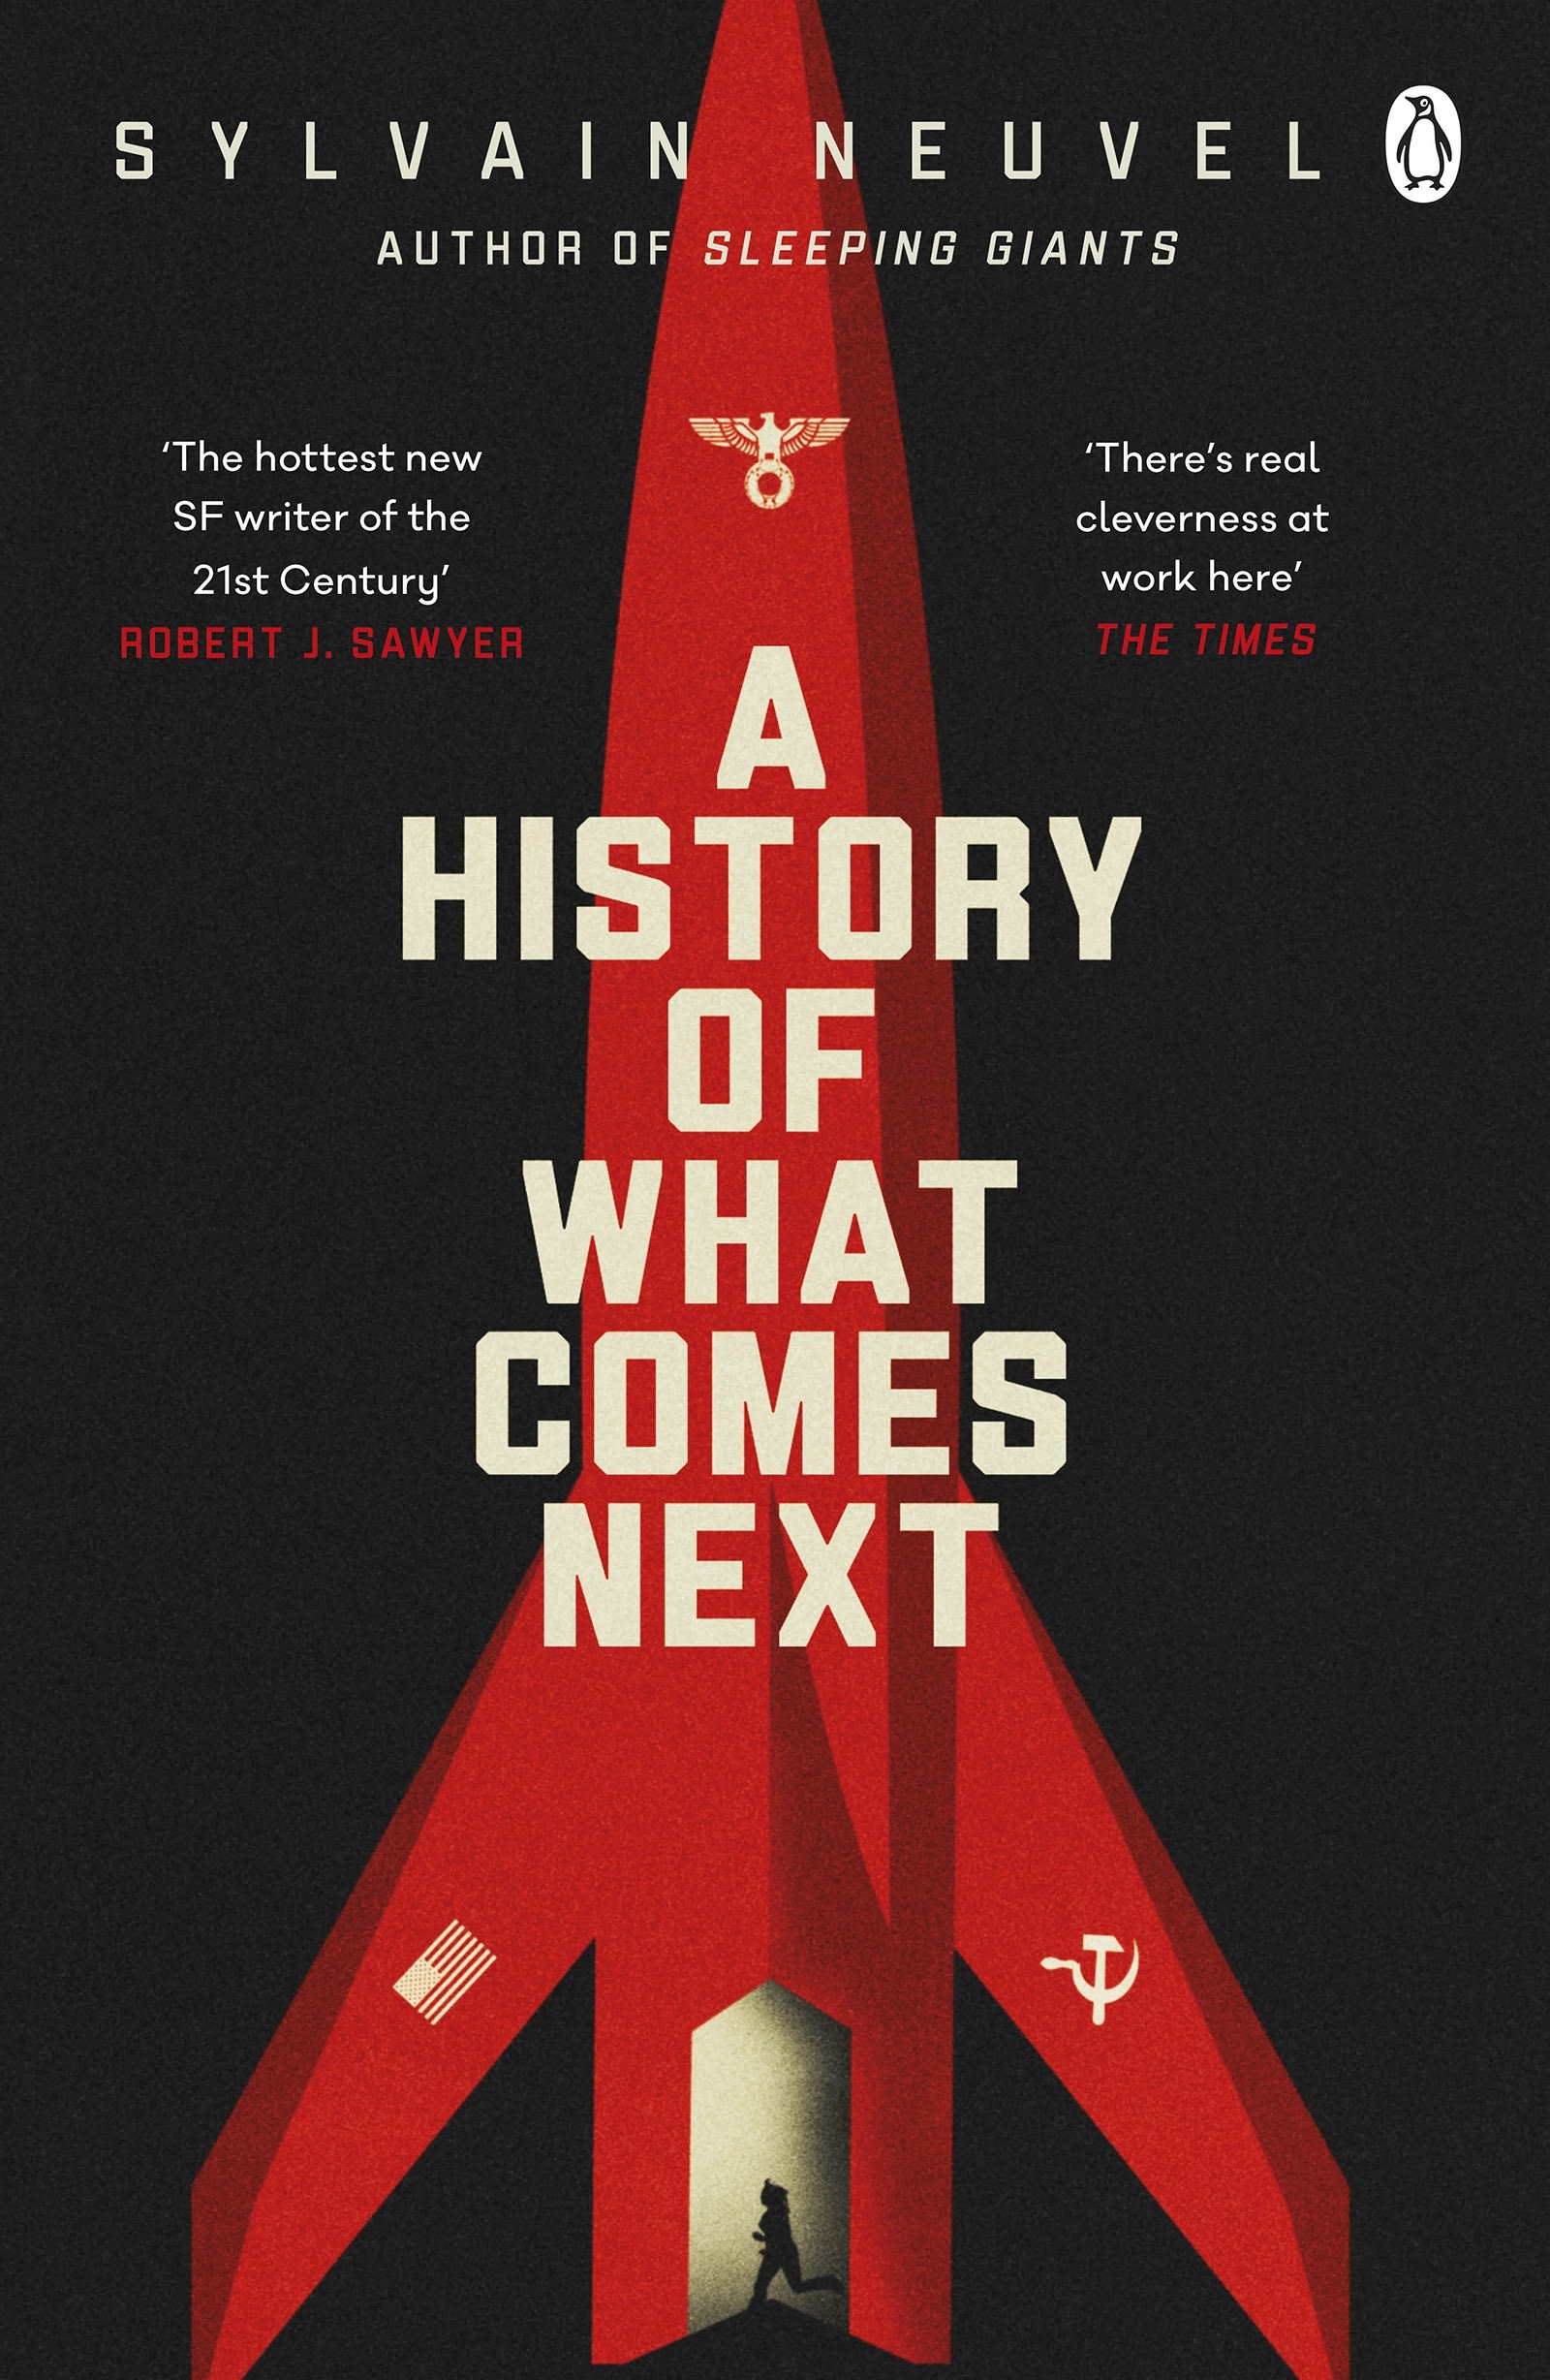 Book “A History of What Comes Next” by Sylvain Neuvel — November 25, 2021